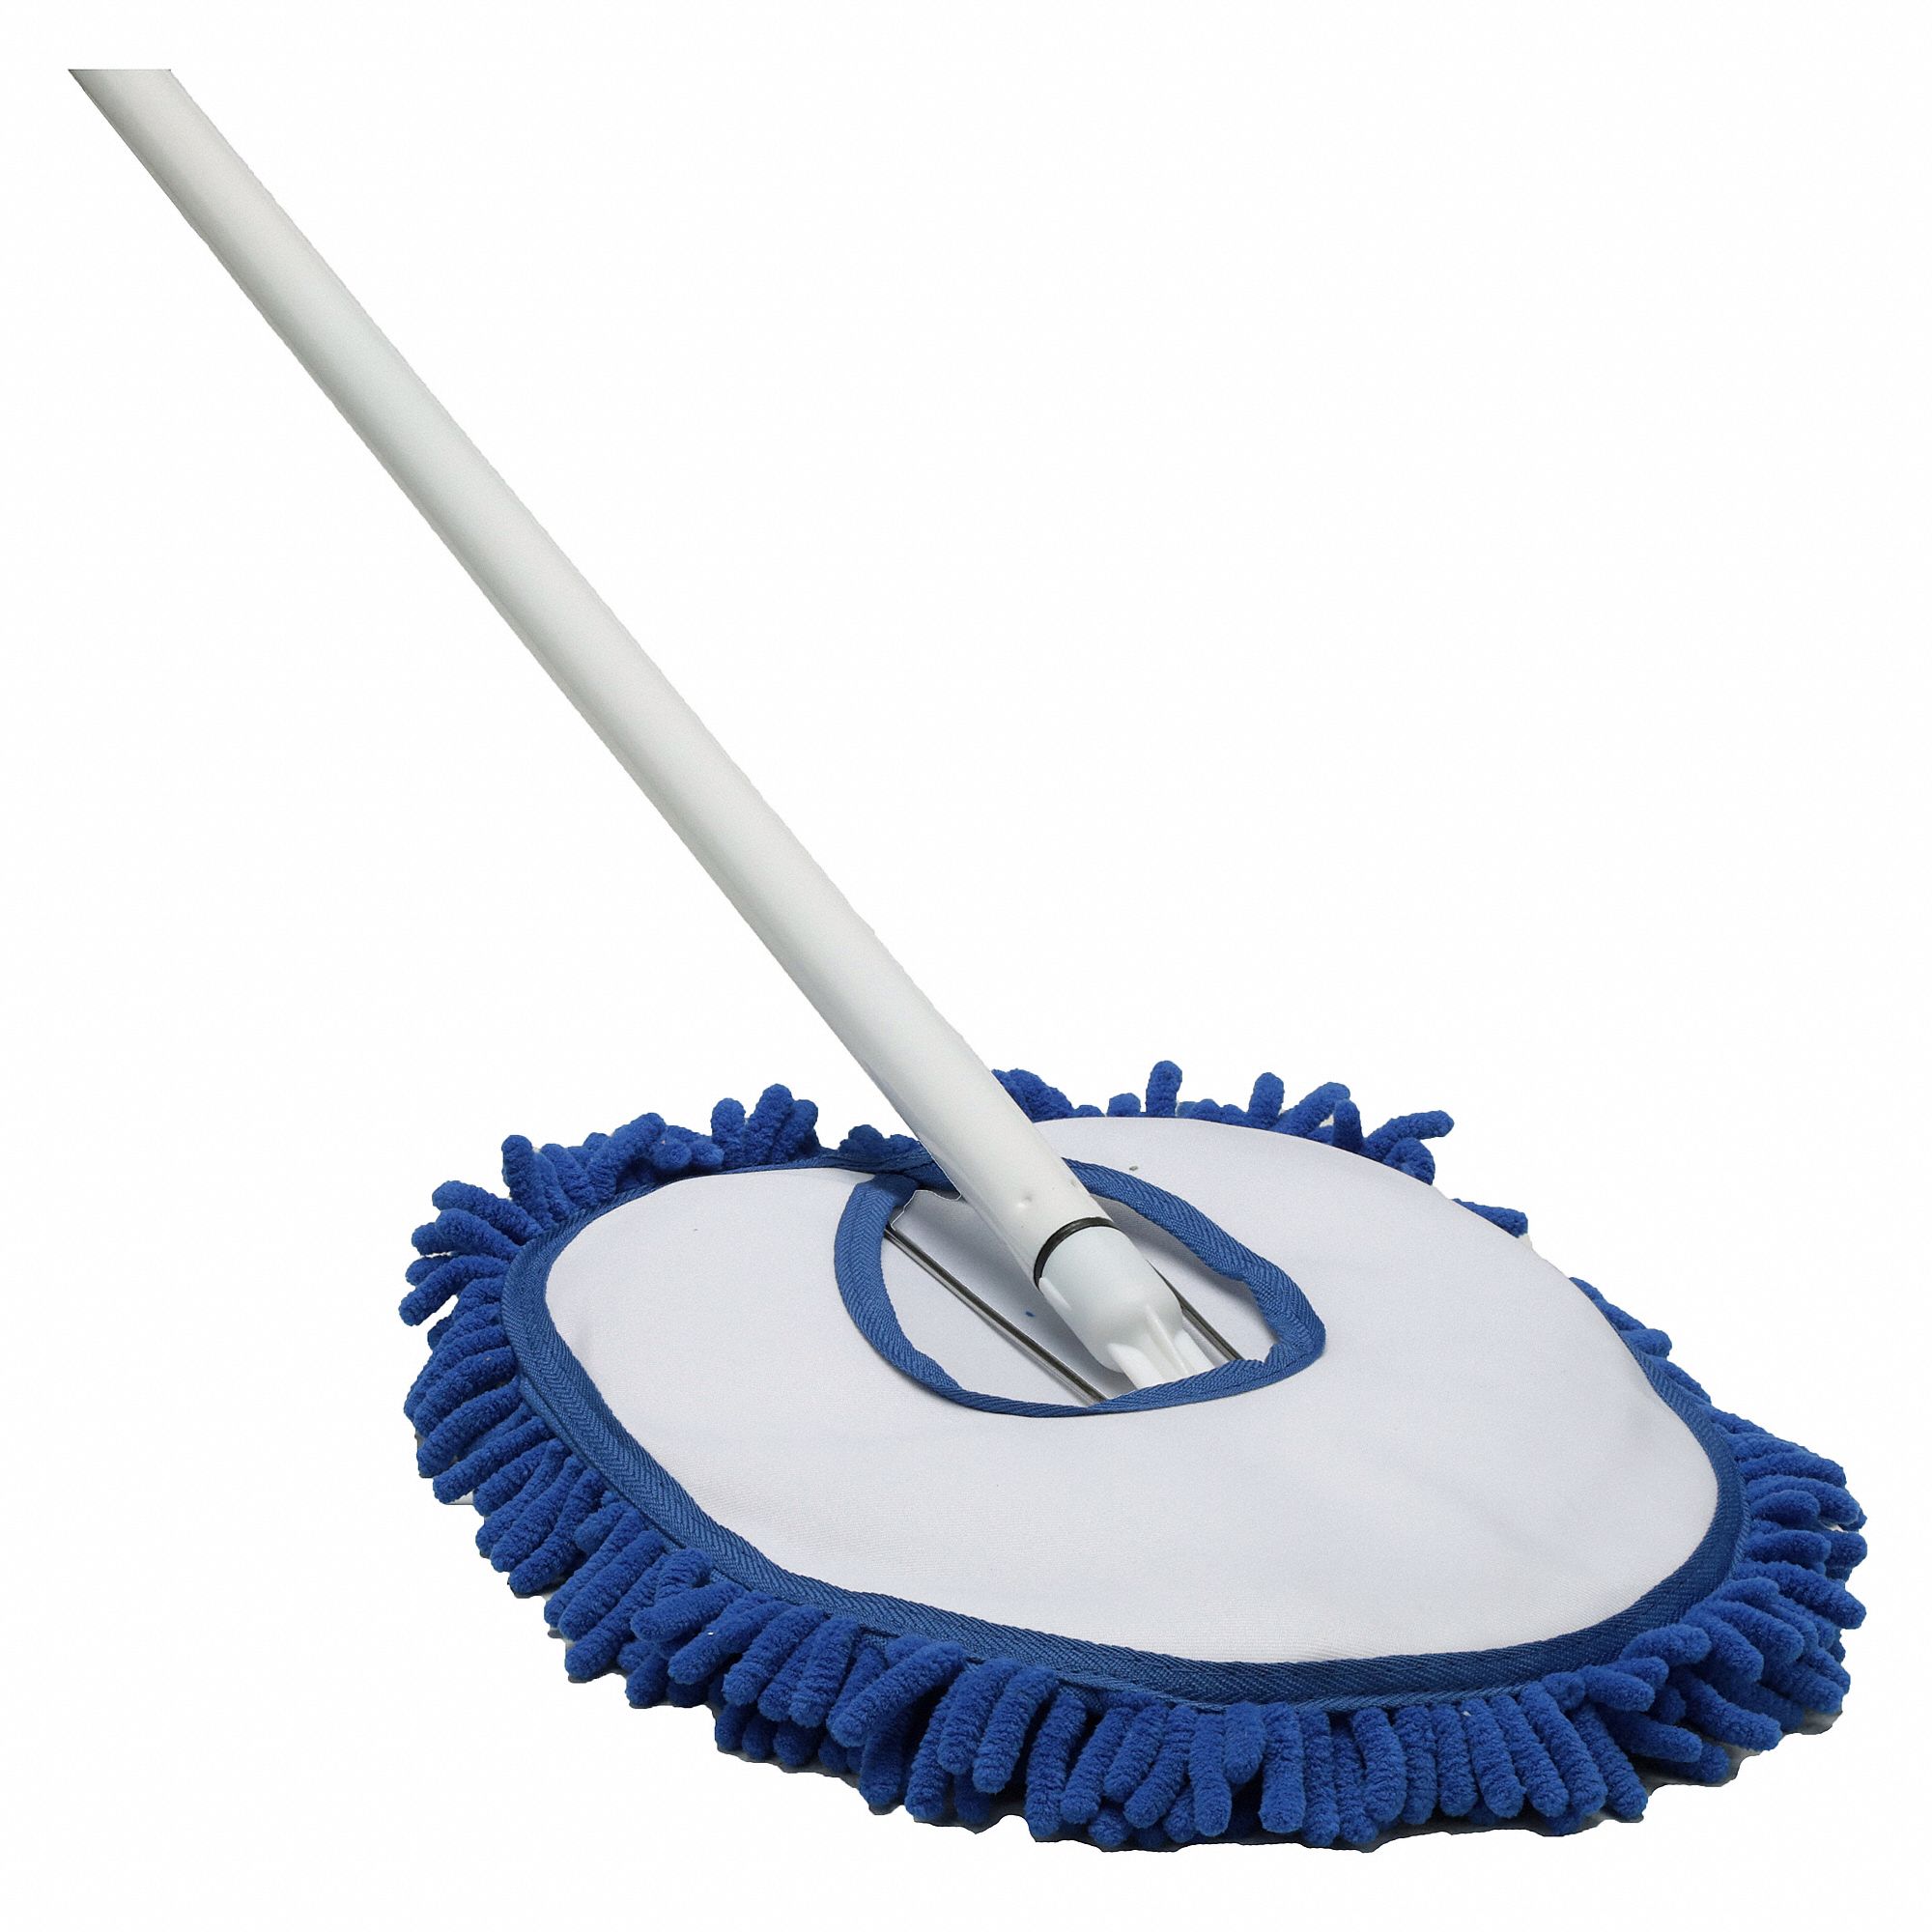 SKILCRAFT Microfiber Dust Mop with Handle by AbilityOne